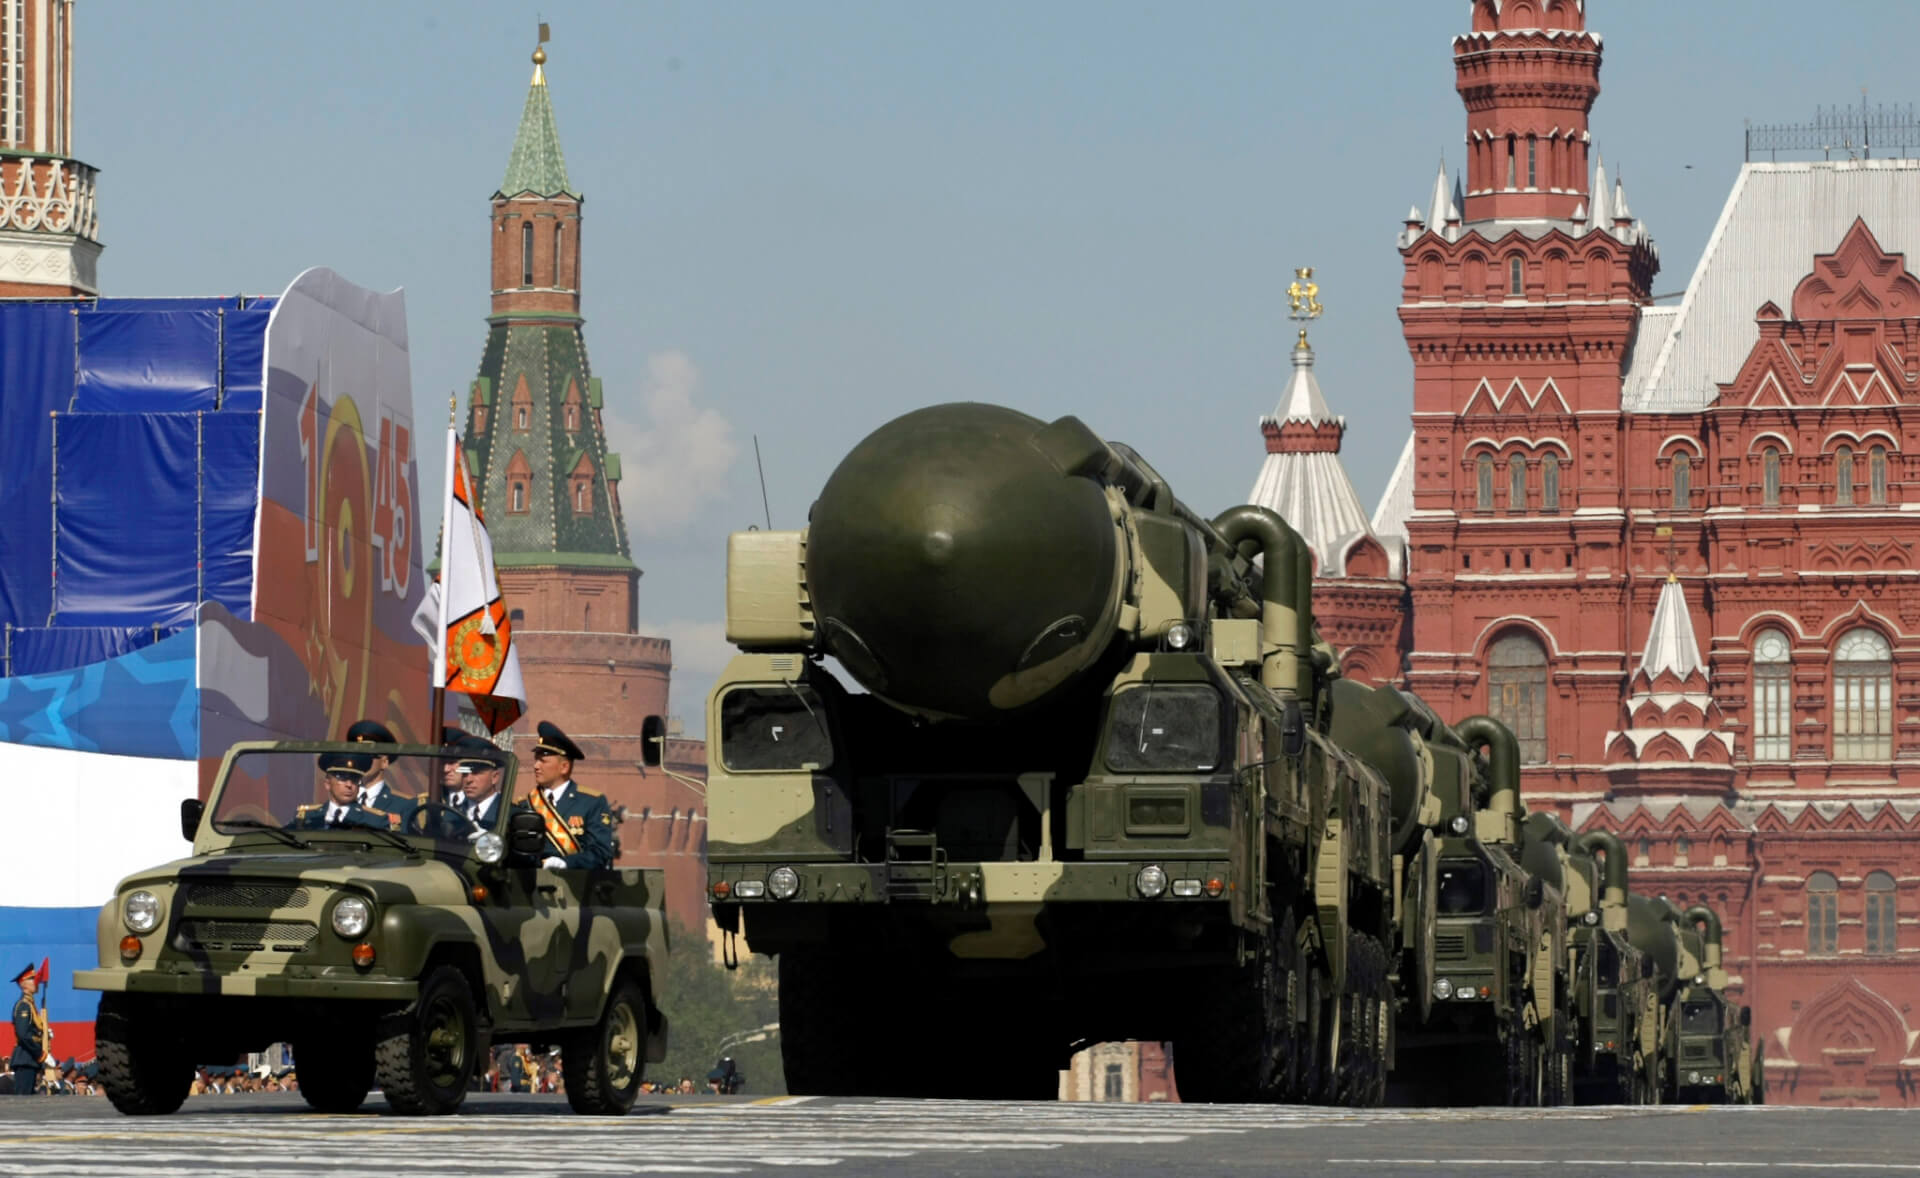 Putin’s Threat to Push the Nuclear Button Is No Hoax